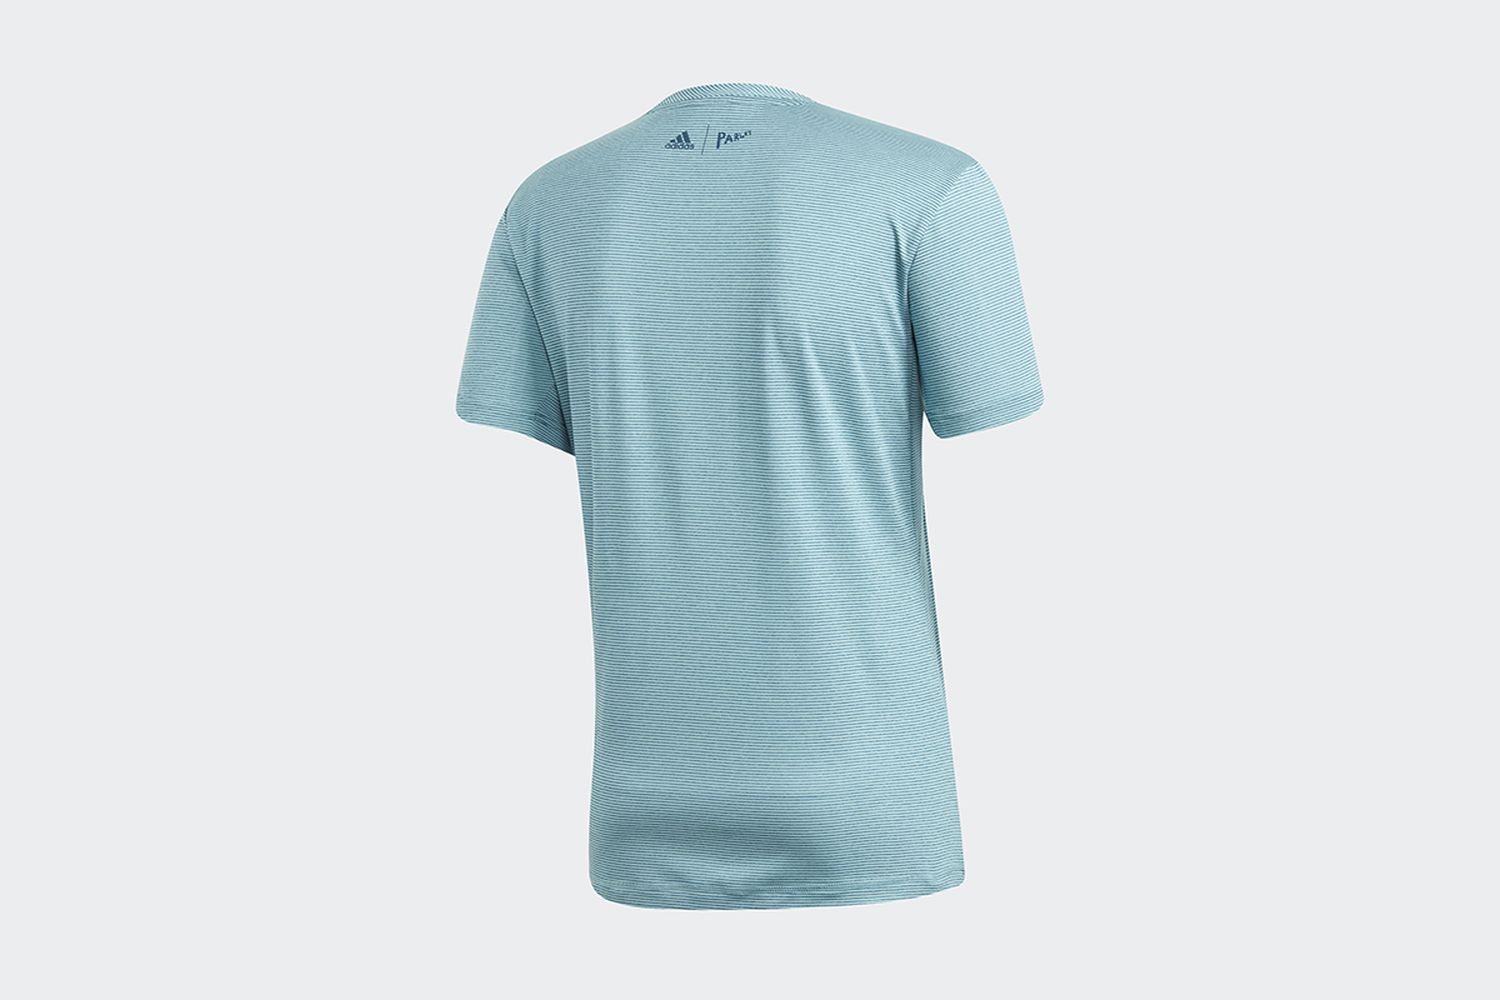 Parley Striped Tee